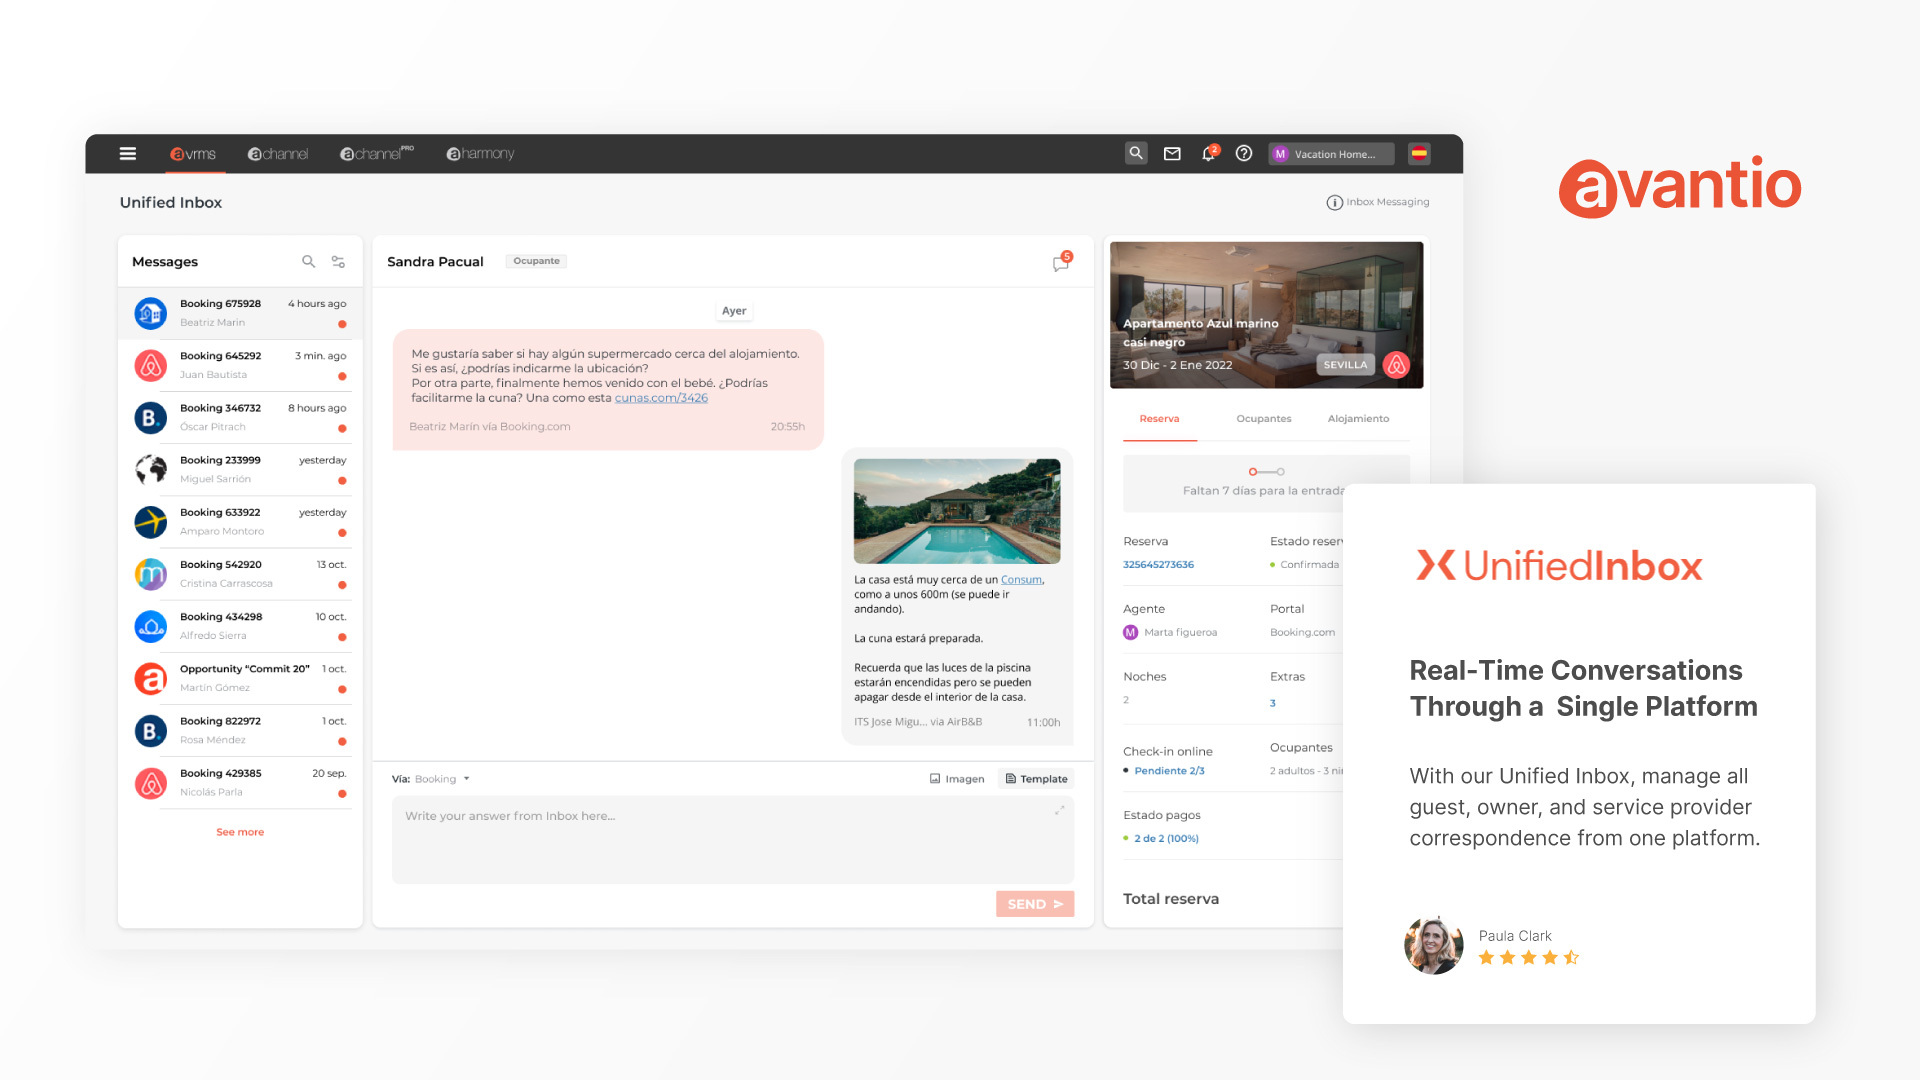 Optimize your business communication with our Unified Inbox, allowing you to quickly respond to guests, suppliers, and owners. Easily find messages associated with your bookings by filtering by the reservation number, date or status.